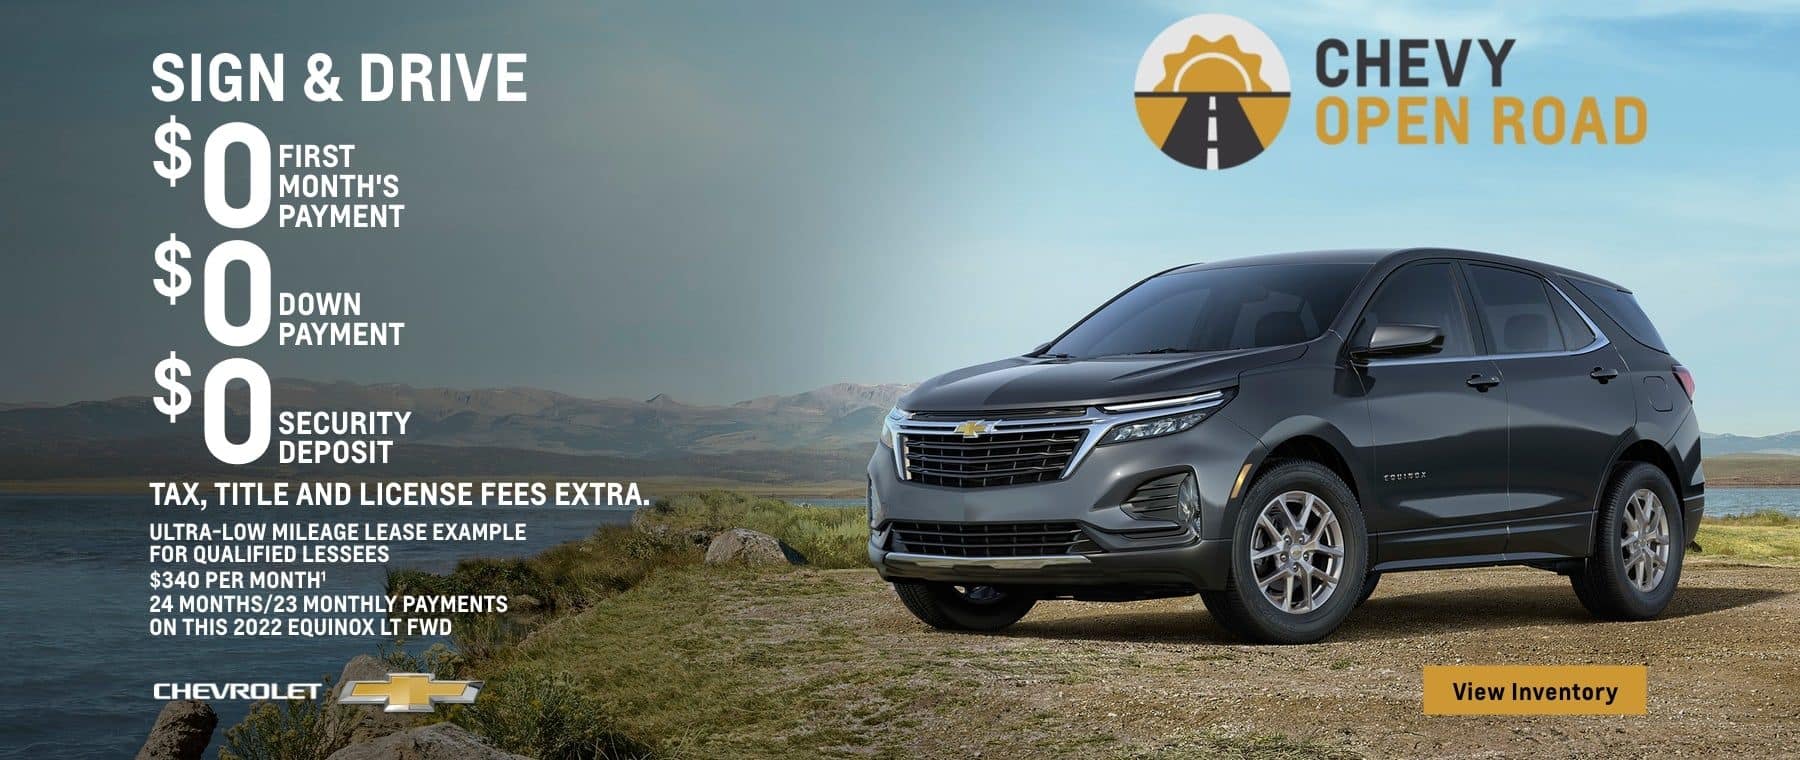 2022 Chevy Equinox LT FWD. Sign & Drive. $0 first month's payment. $0 down payment. $0 security deposit. Tax, title and license fees extra. Ultra-low mileage lease example for qualified lessees. $340 per month. 24 months/23 monthly payments on this Equinox LT FWD.